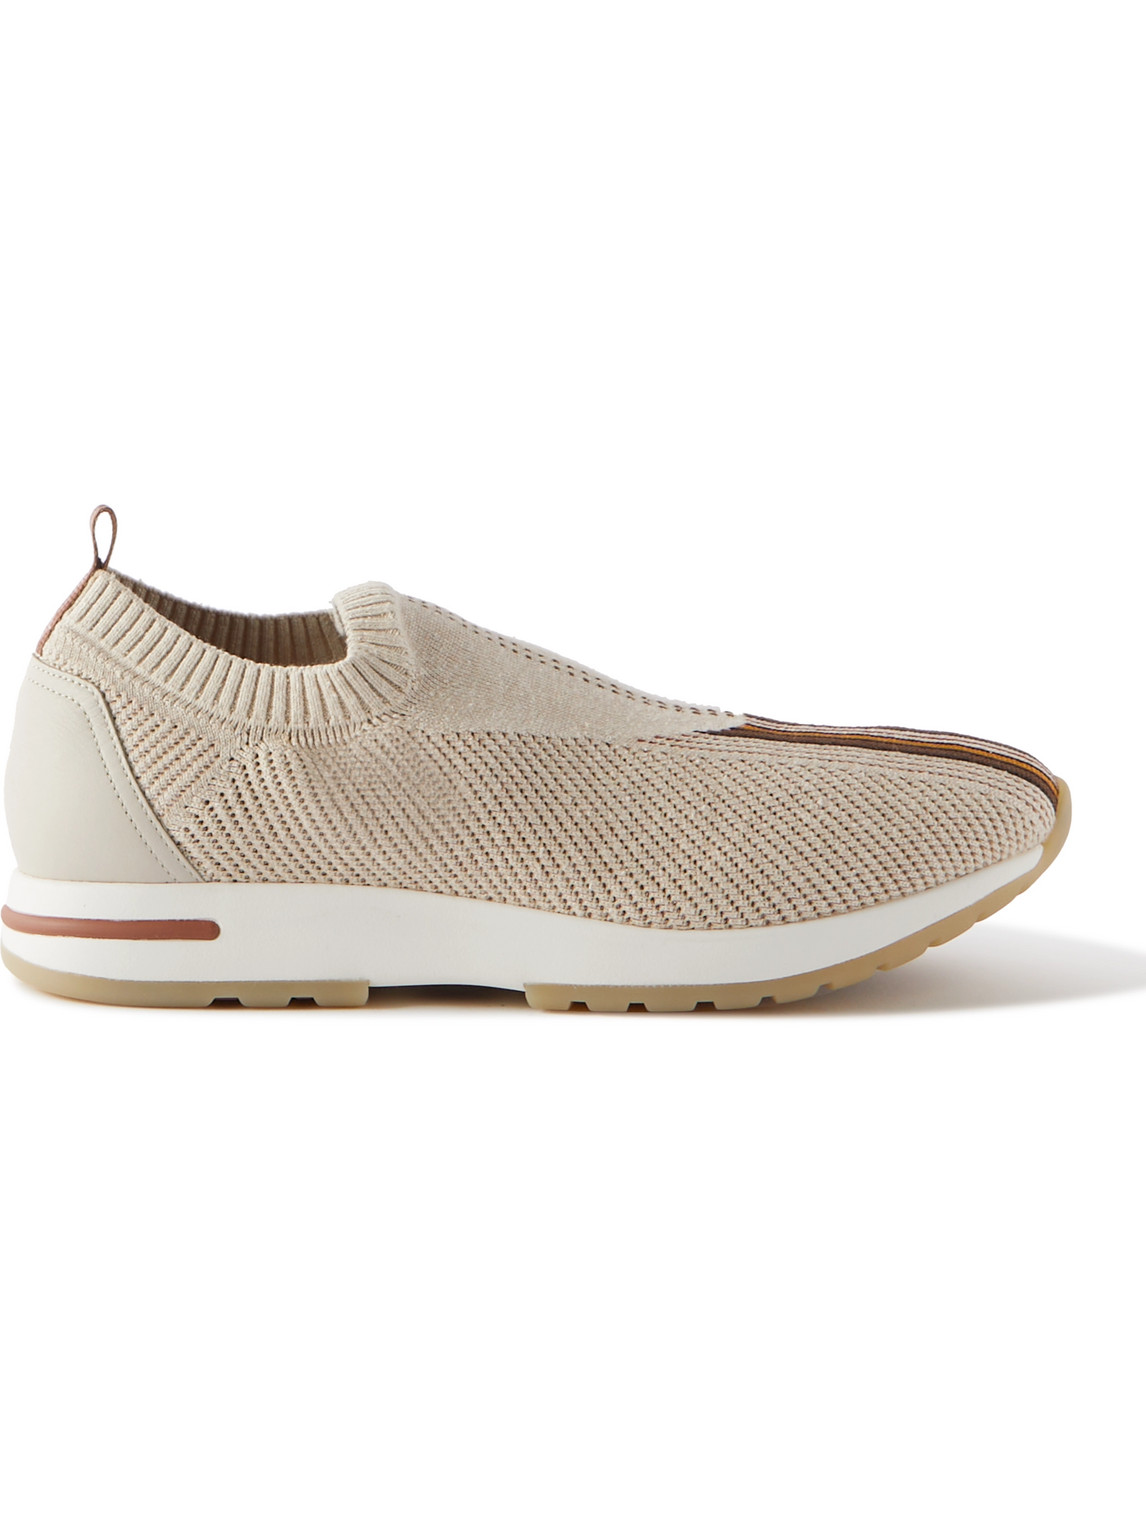 Loro Piana 360 Lp Flexy Walk Leather-trimmed Linen And Silk-blend Slip-on Sneakers In Neutrals